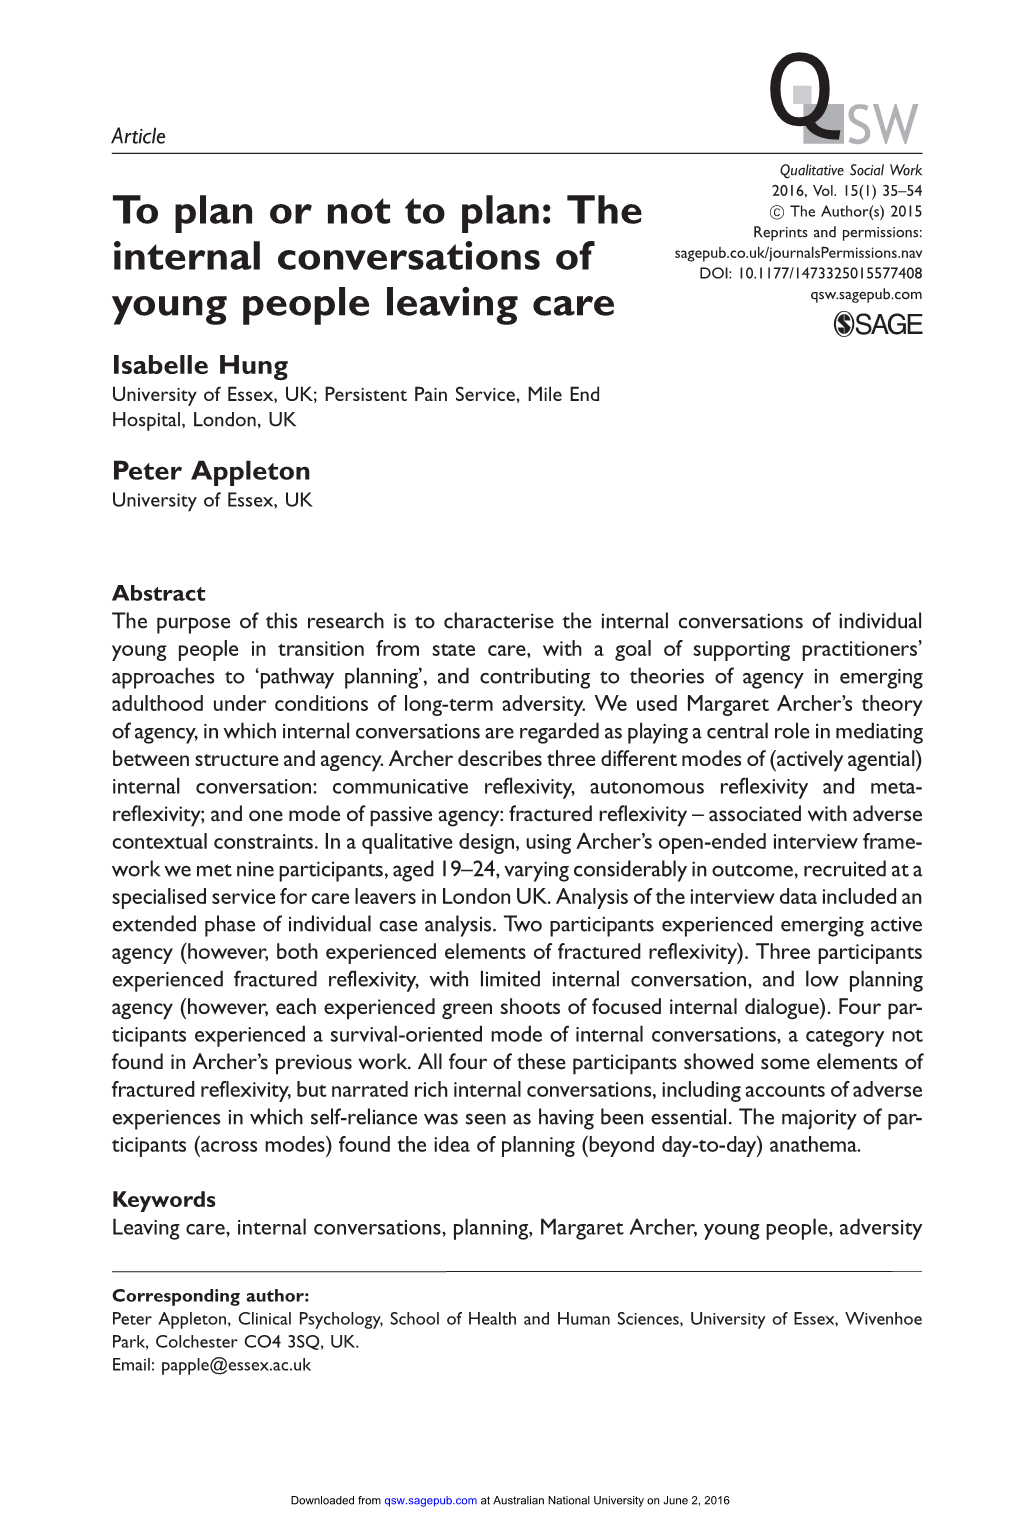 The Internal Conversations of Young People Leaving Care